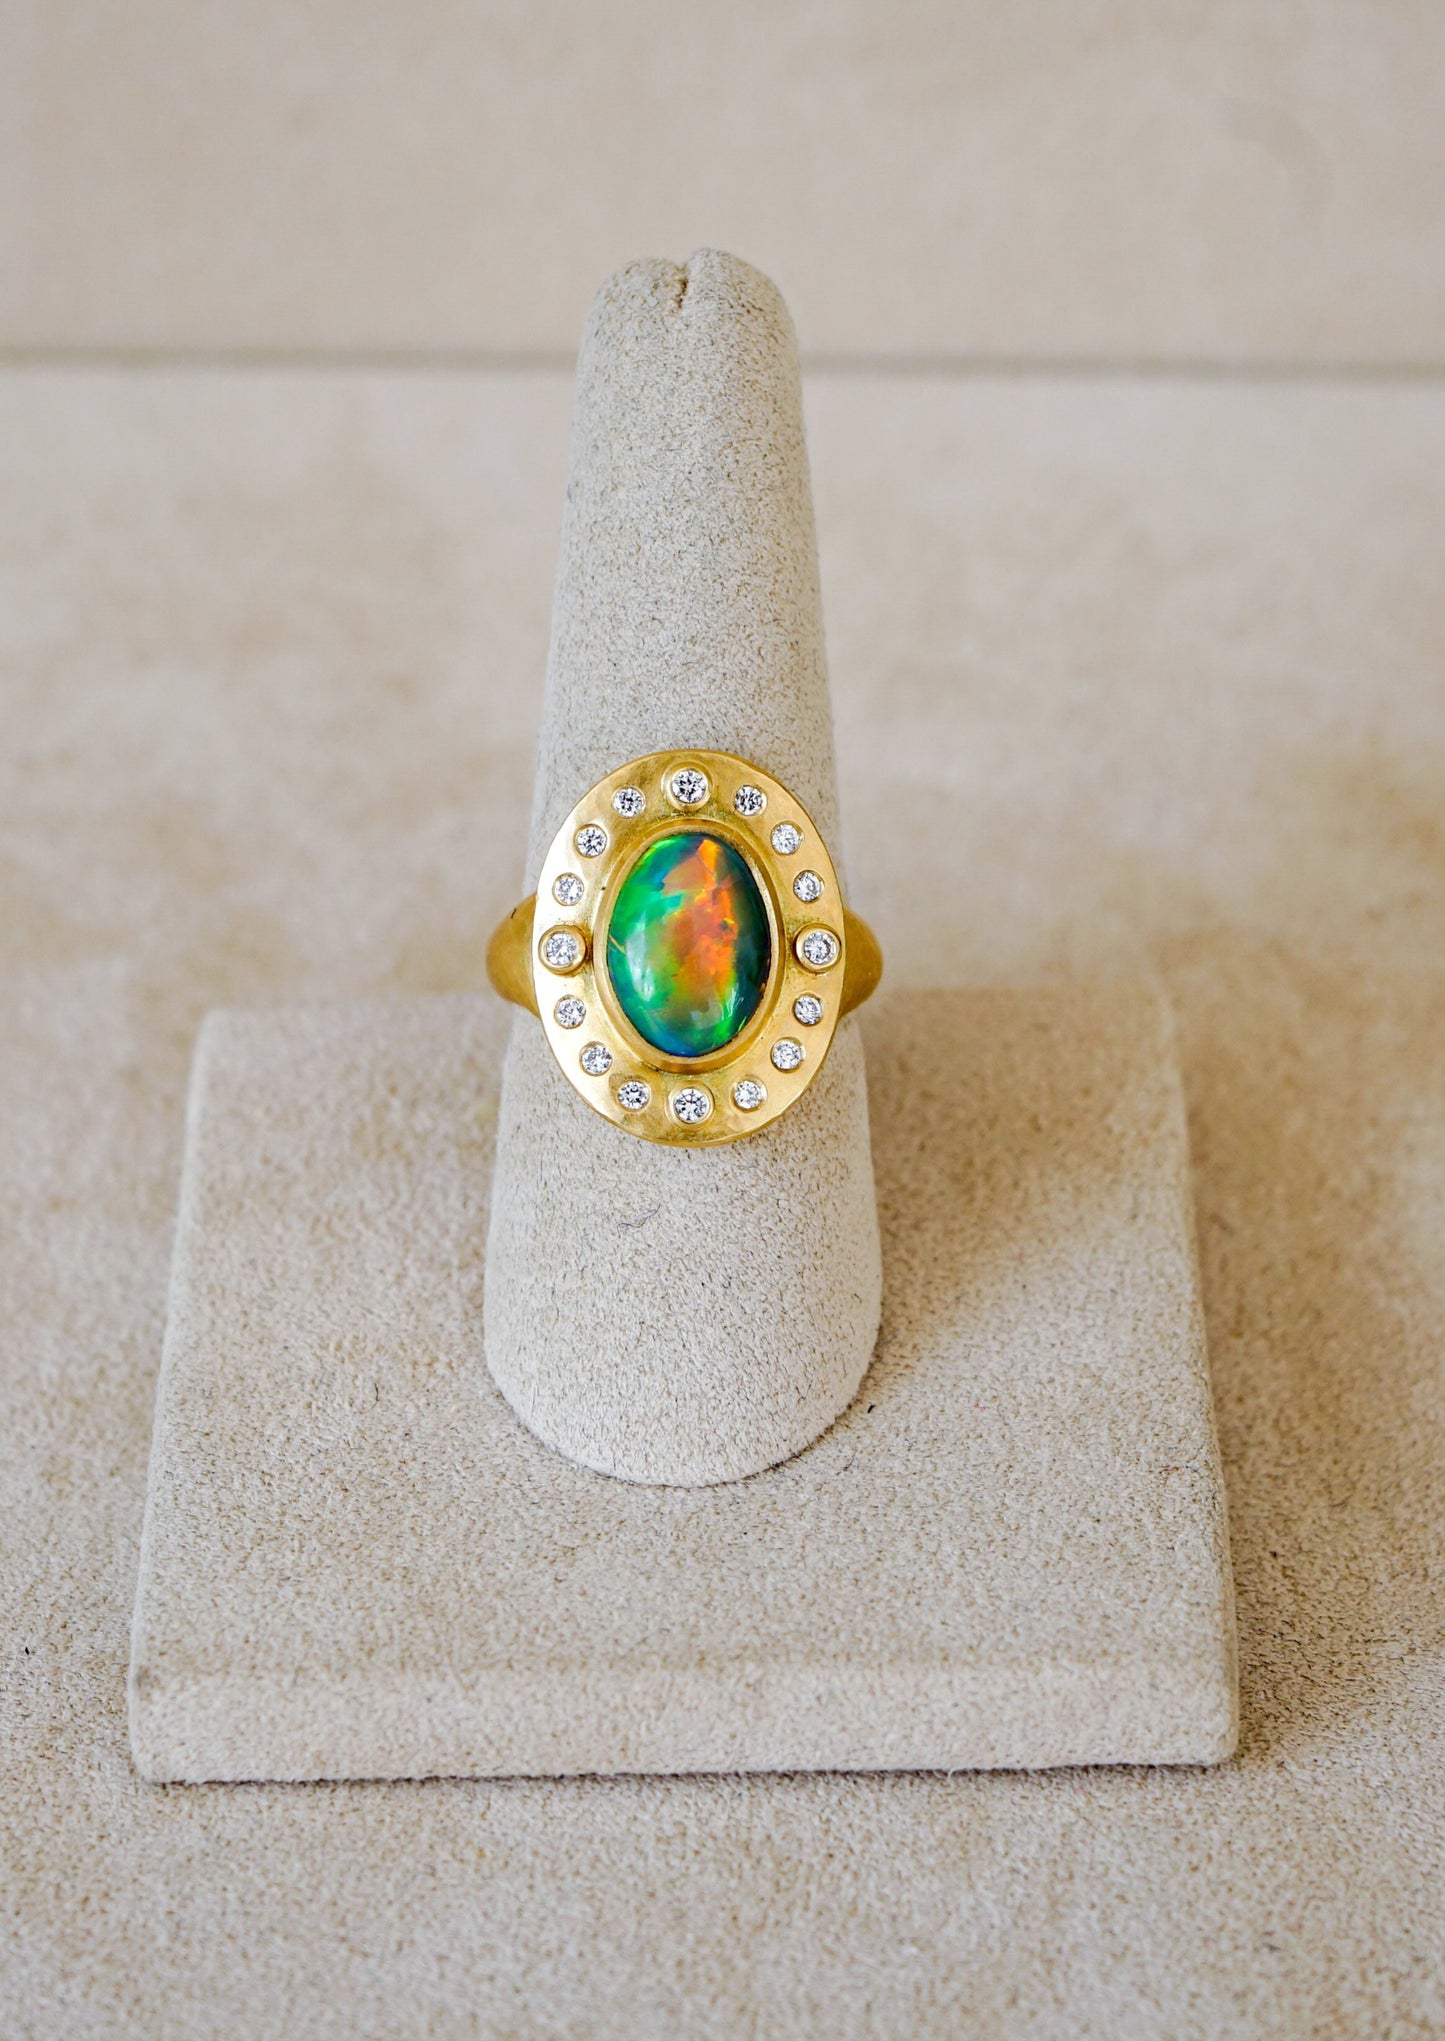 3.2 ct Black Opal Ring with Diamonds in 18 kt Gold